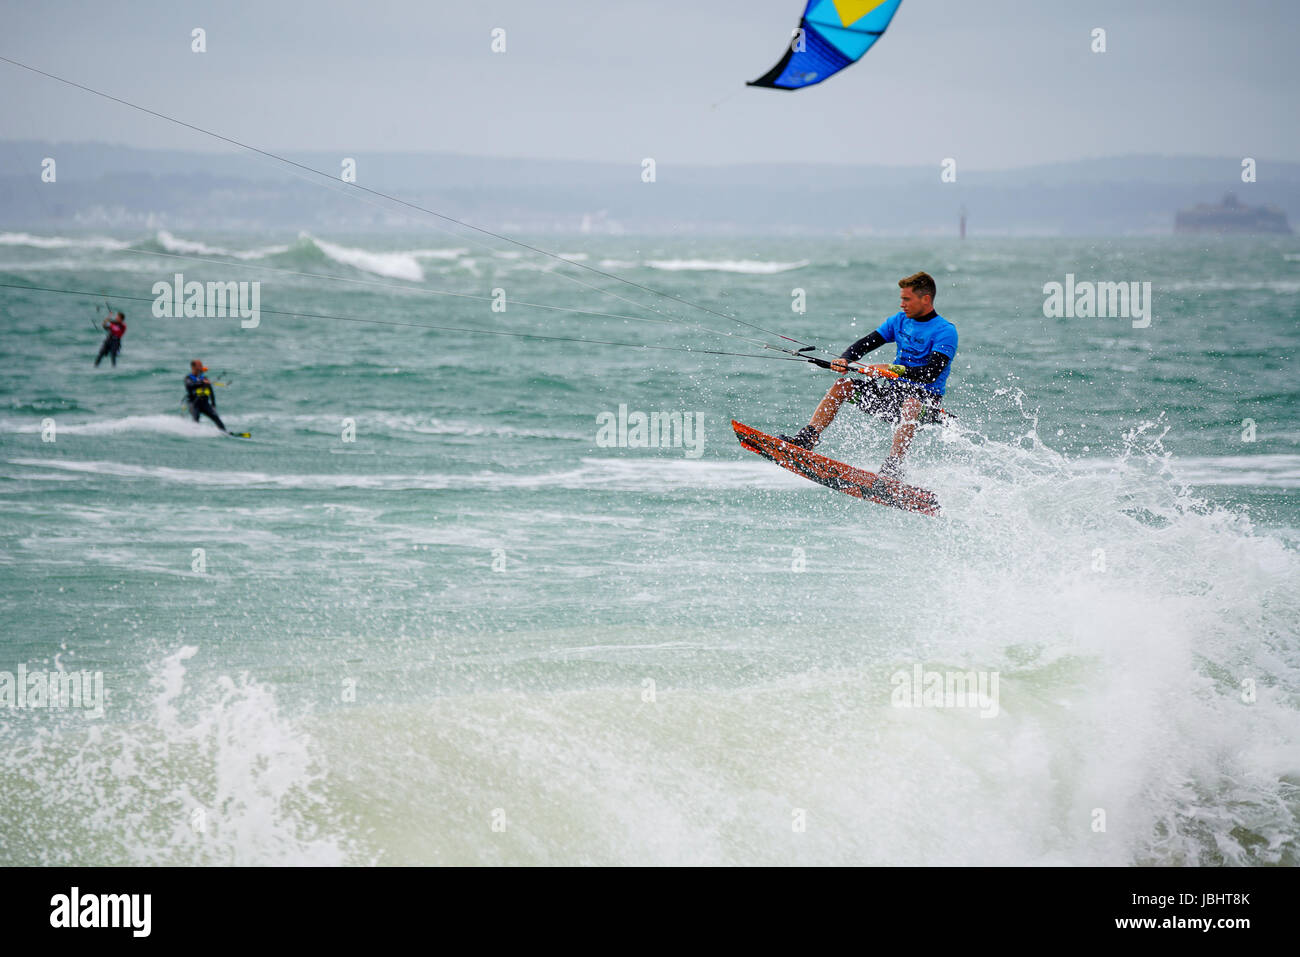 Beachlands, Hayling Island. 11th June 2017. The Virgin Kitesurfing Armada took place off Hayling Island today with excellent wind and waves. Kitesurfers making the most of the conditions off Beachlands, Hayling Island, Hampshire. Credit: james jagger/Alamy Live News Stock Photo